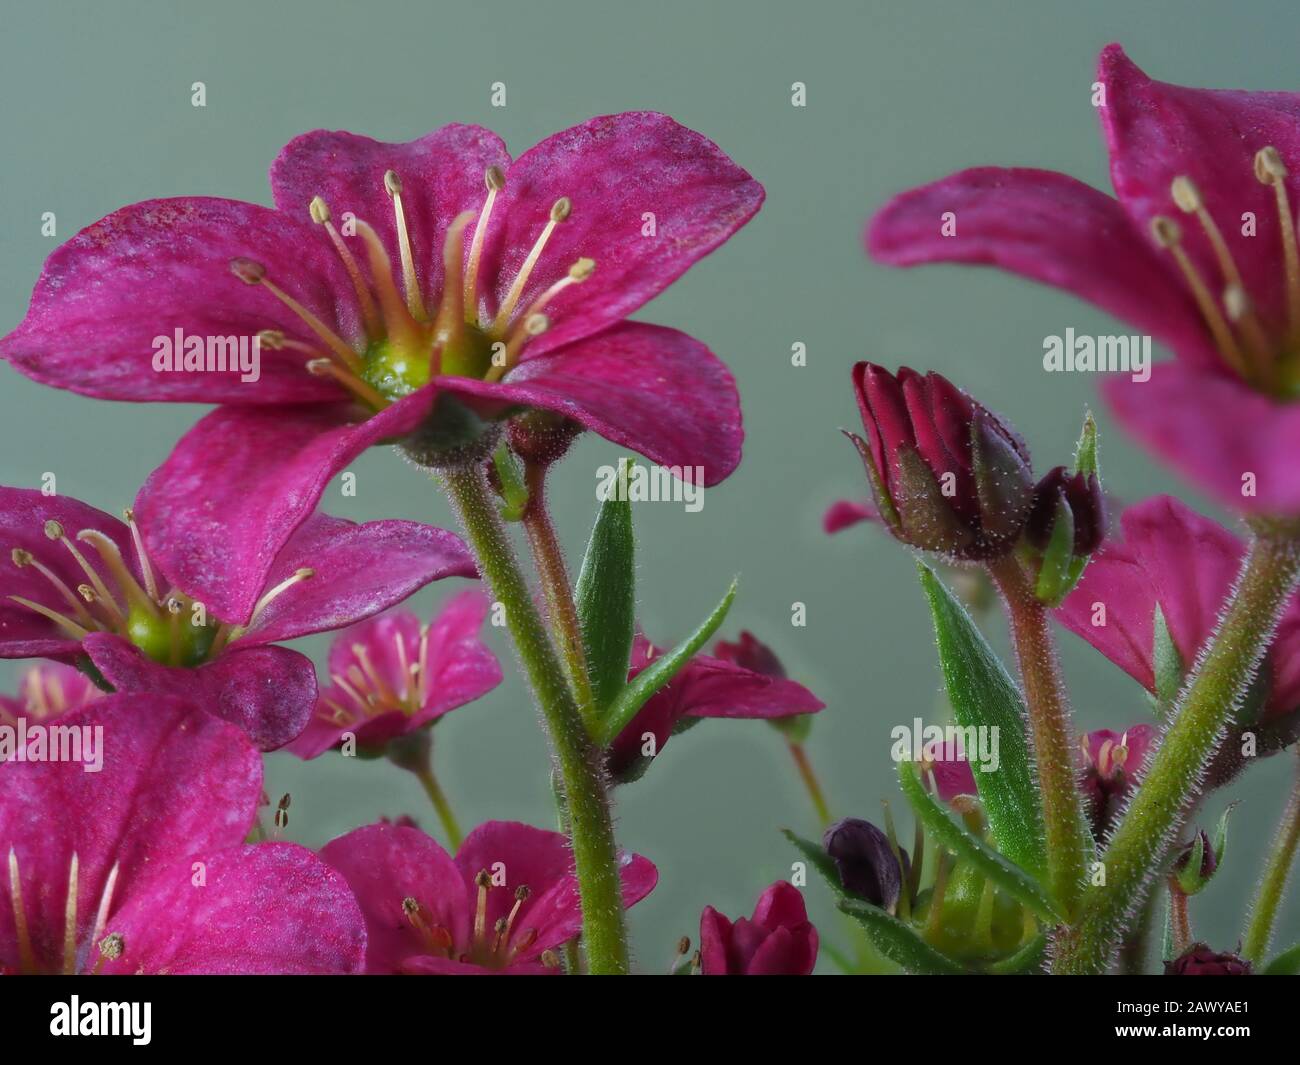 Macro of pretty little Saxifrage flowers, variety Alpino Pink Early, against a plain background Stock Photo